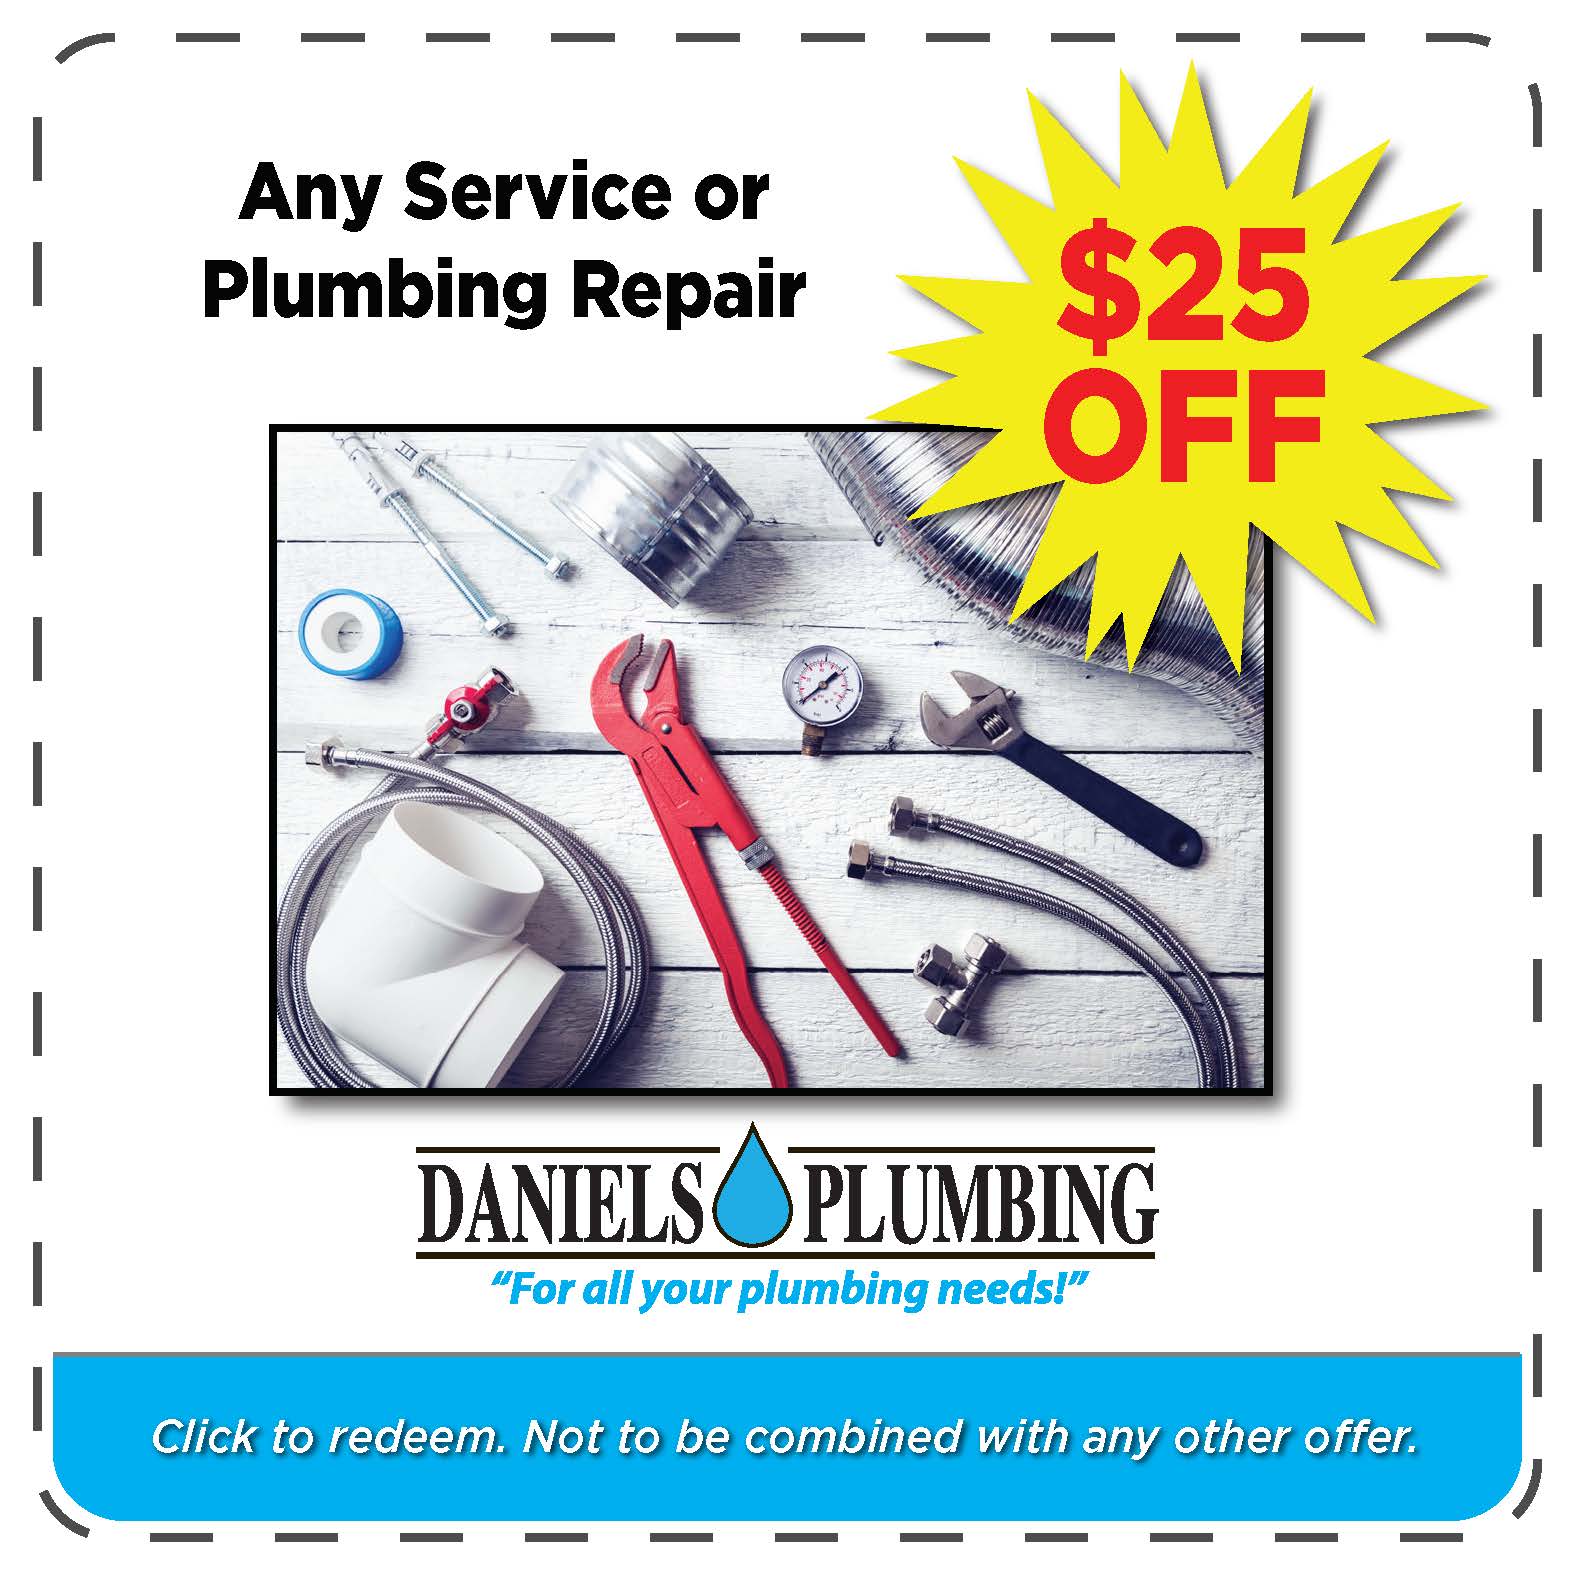 18-2 1288 Daniel's Plumbing Coupons proof_Page_2